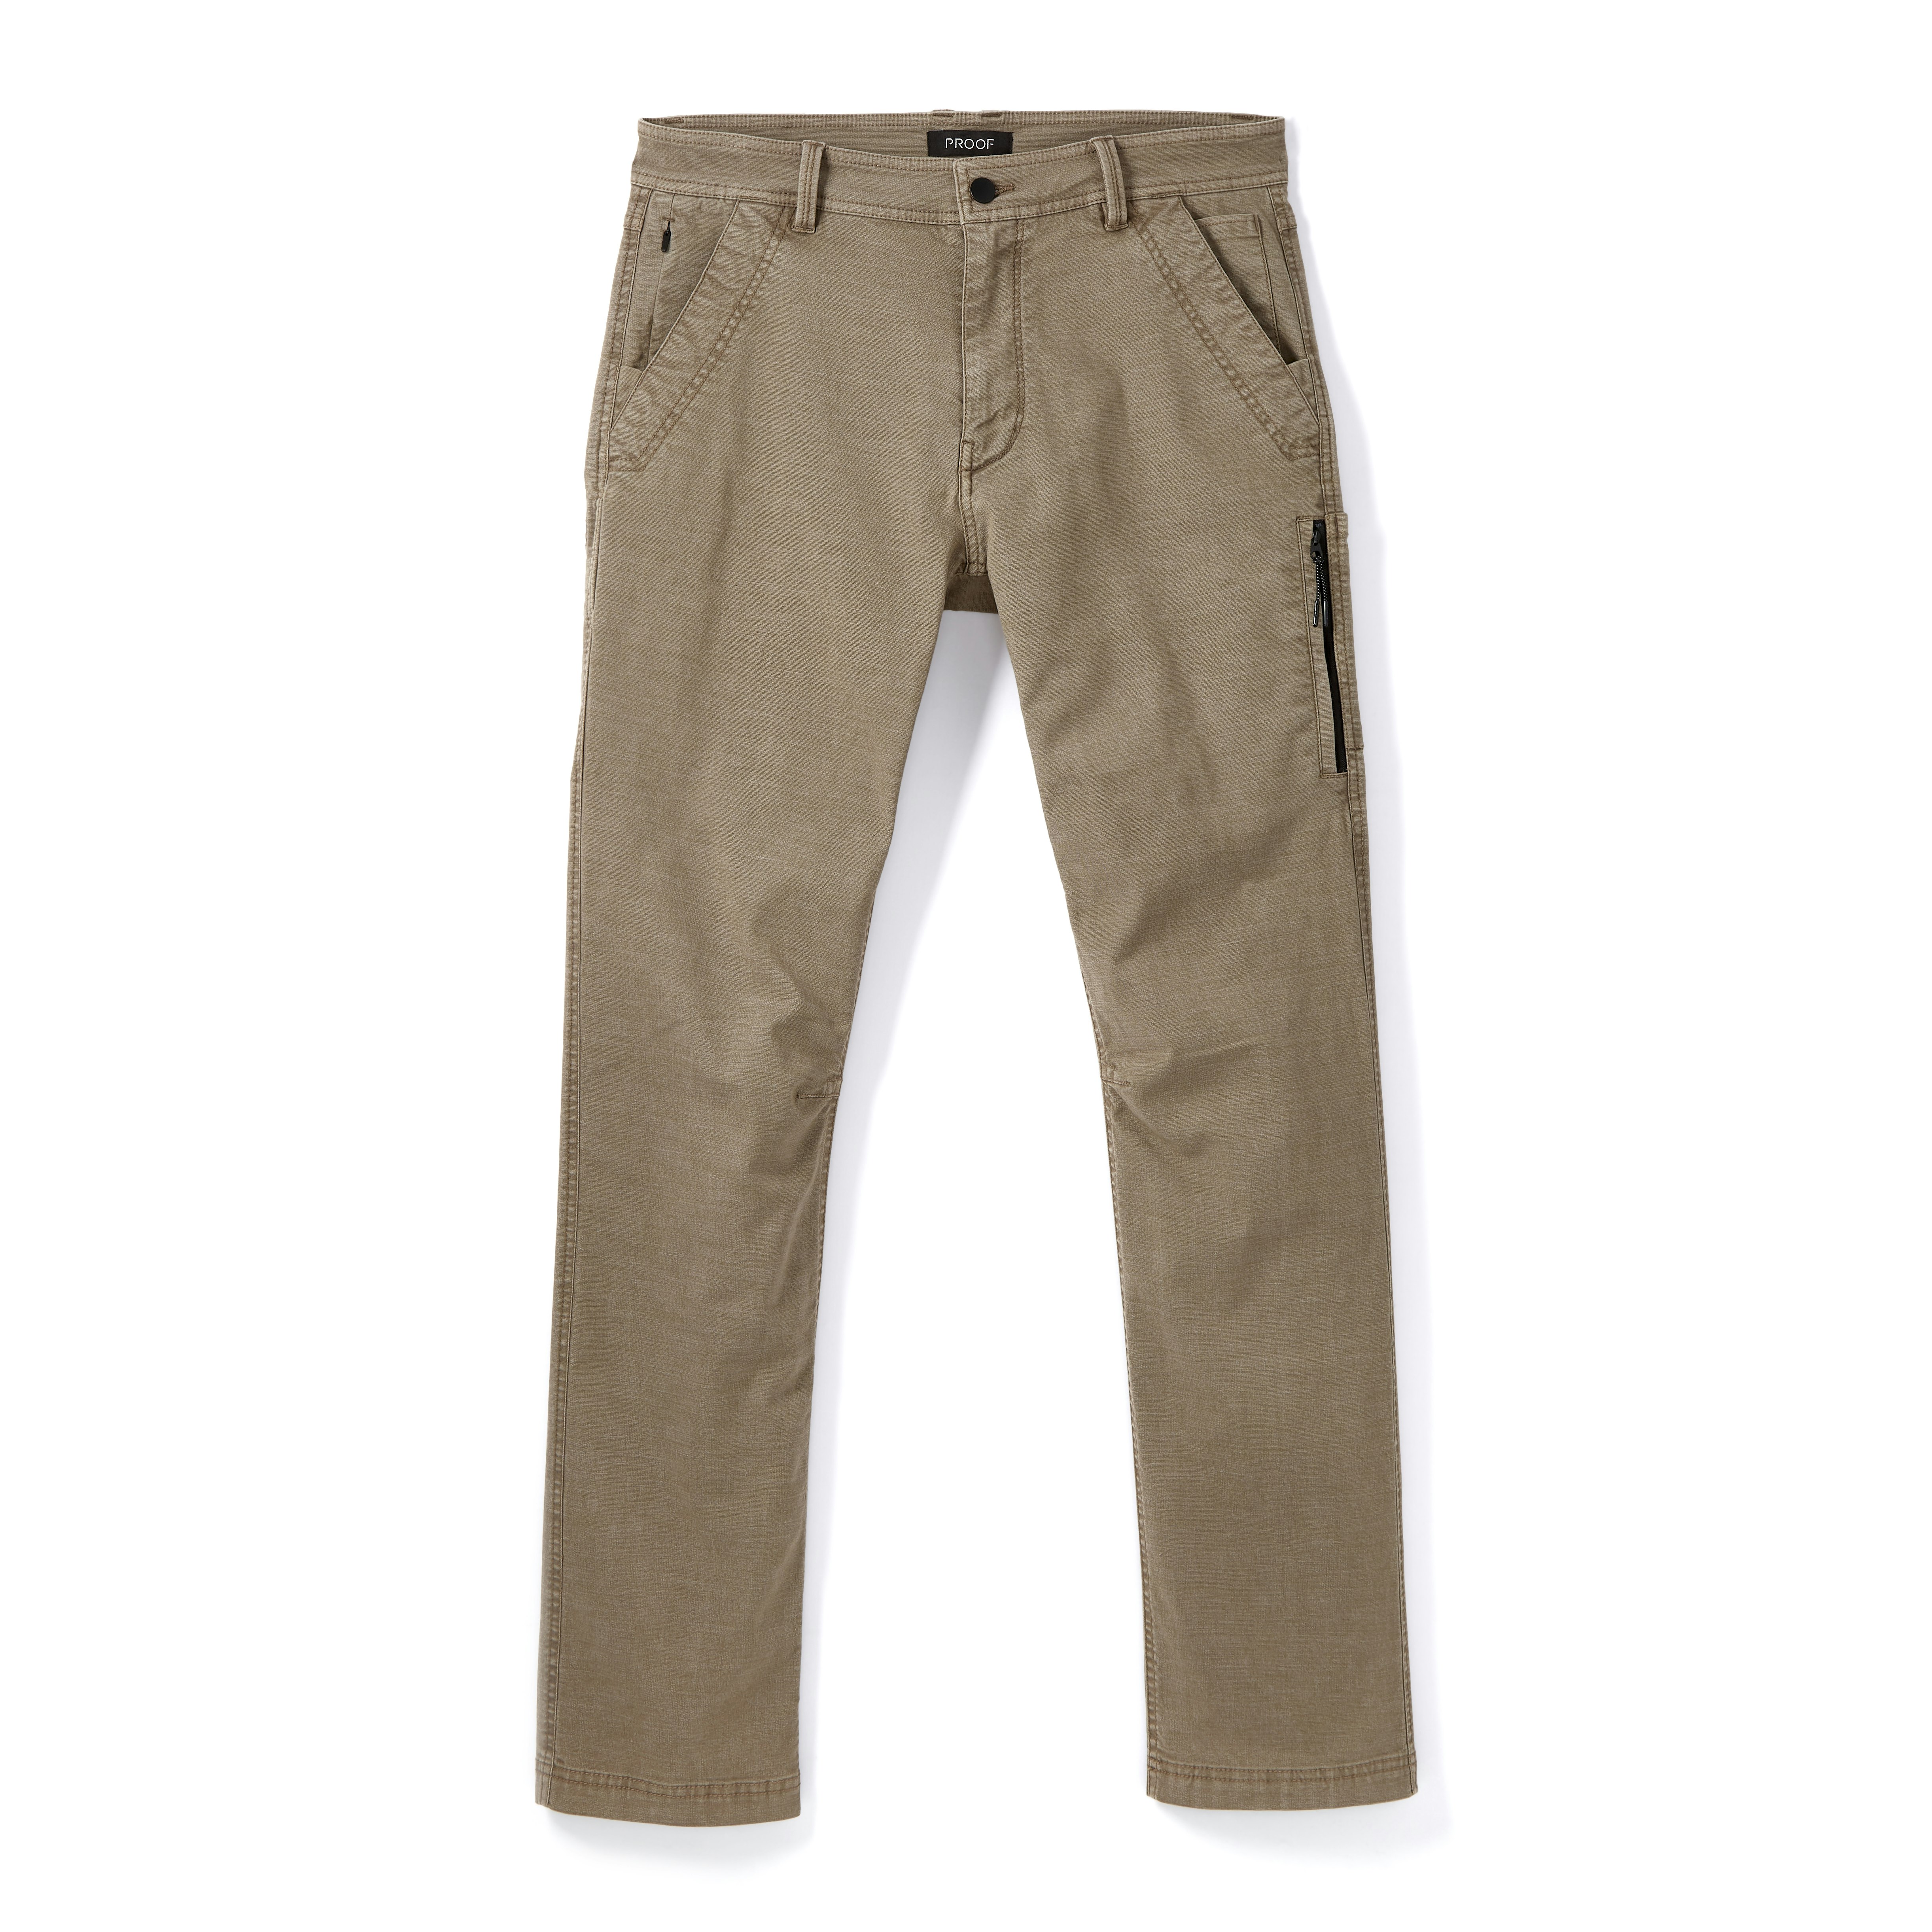 GABARDIN CASUAL PANTS IN ANTHRACITE